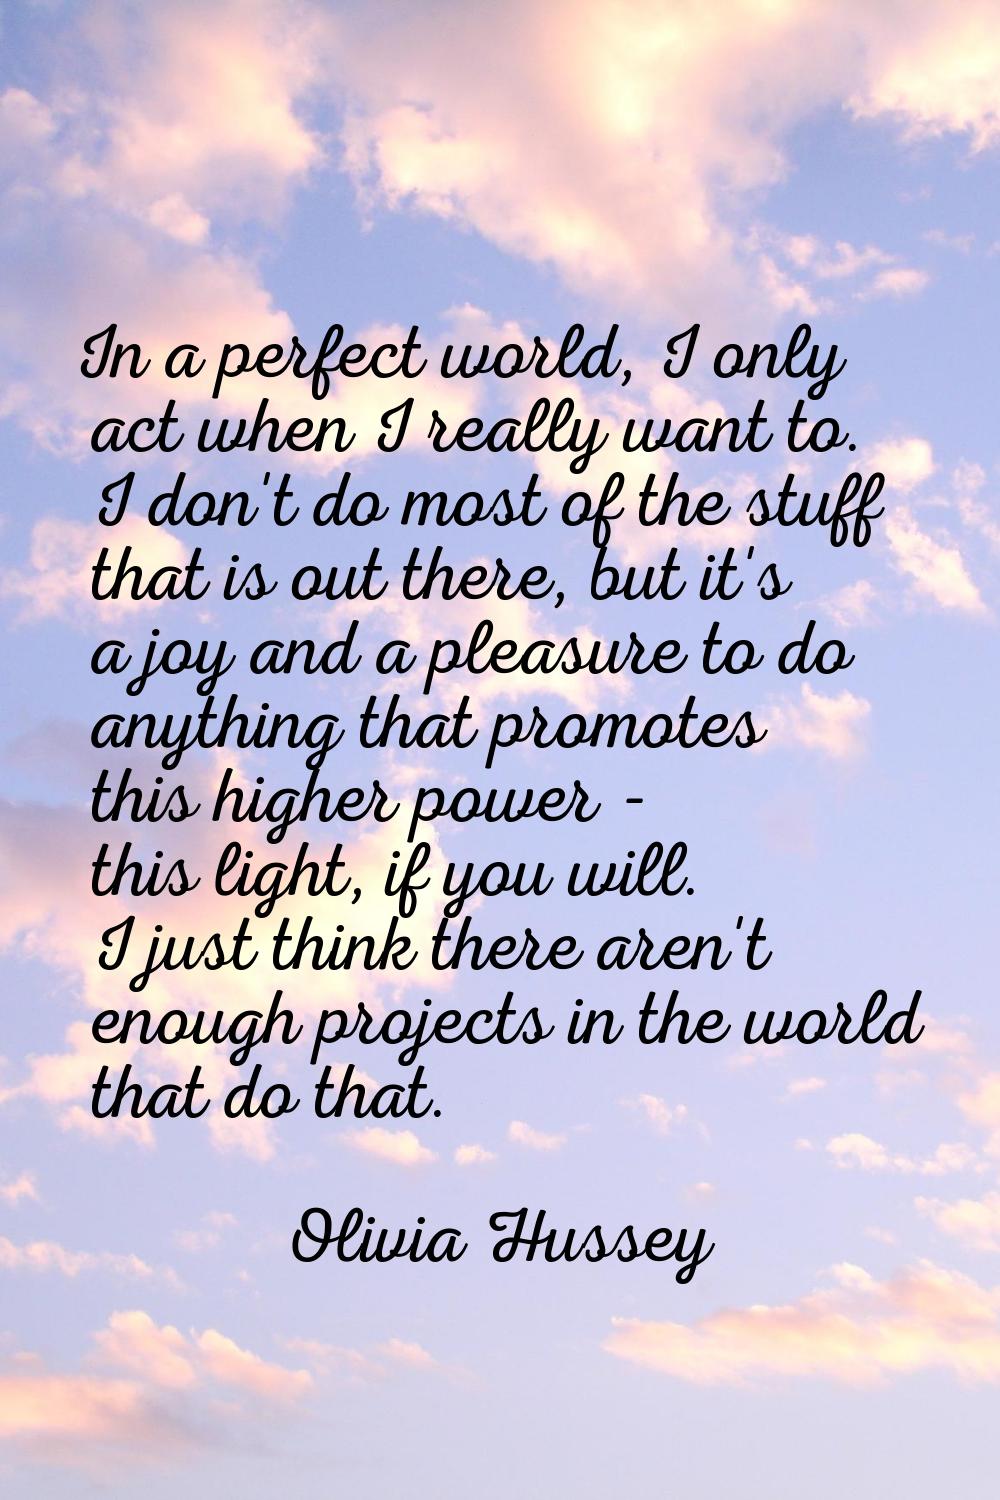 In a perfect world, I only act when I really want to. I don't do most of the stuff that is out ther